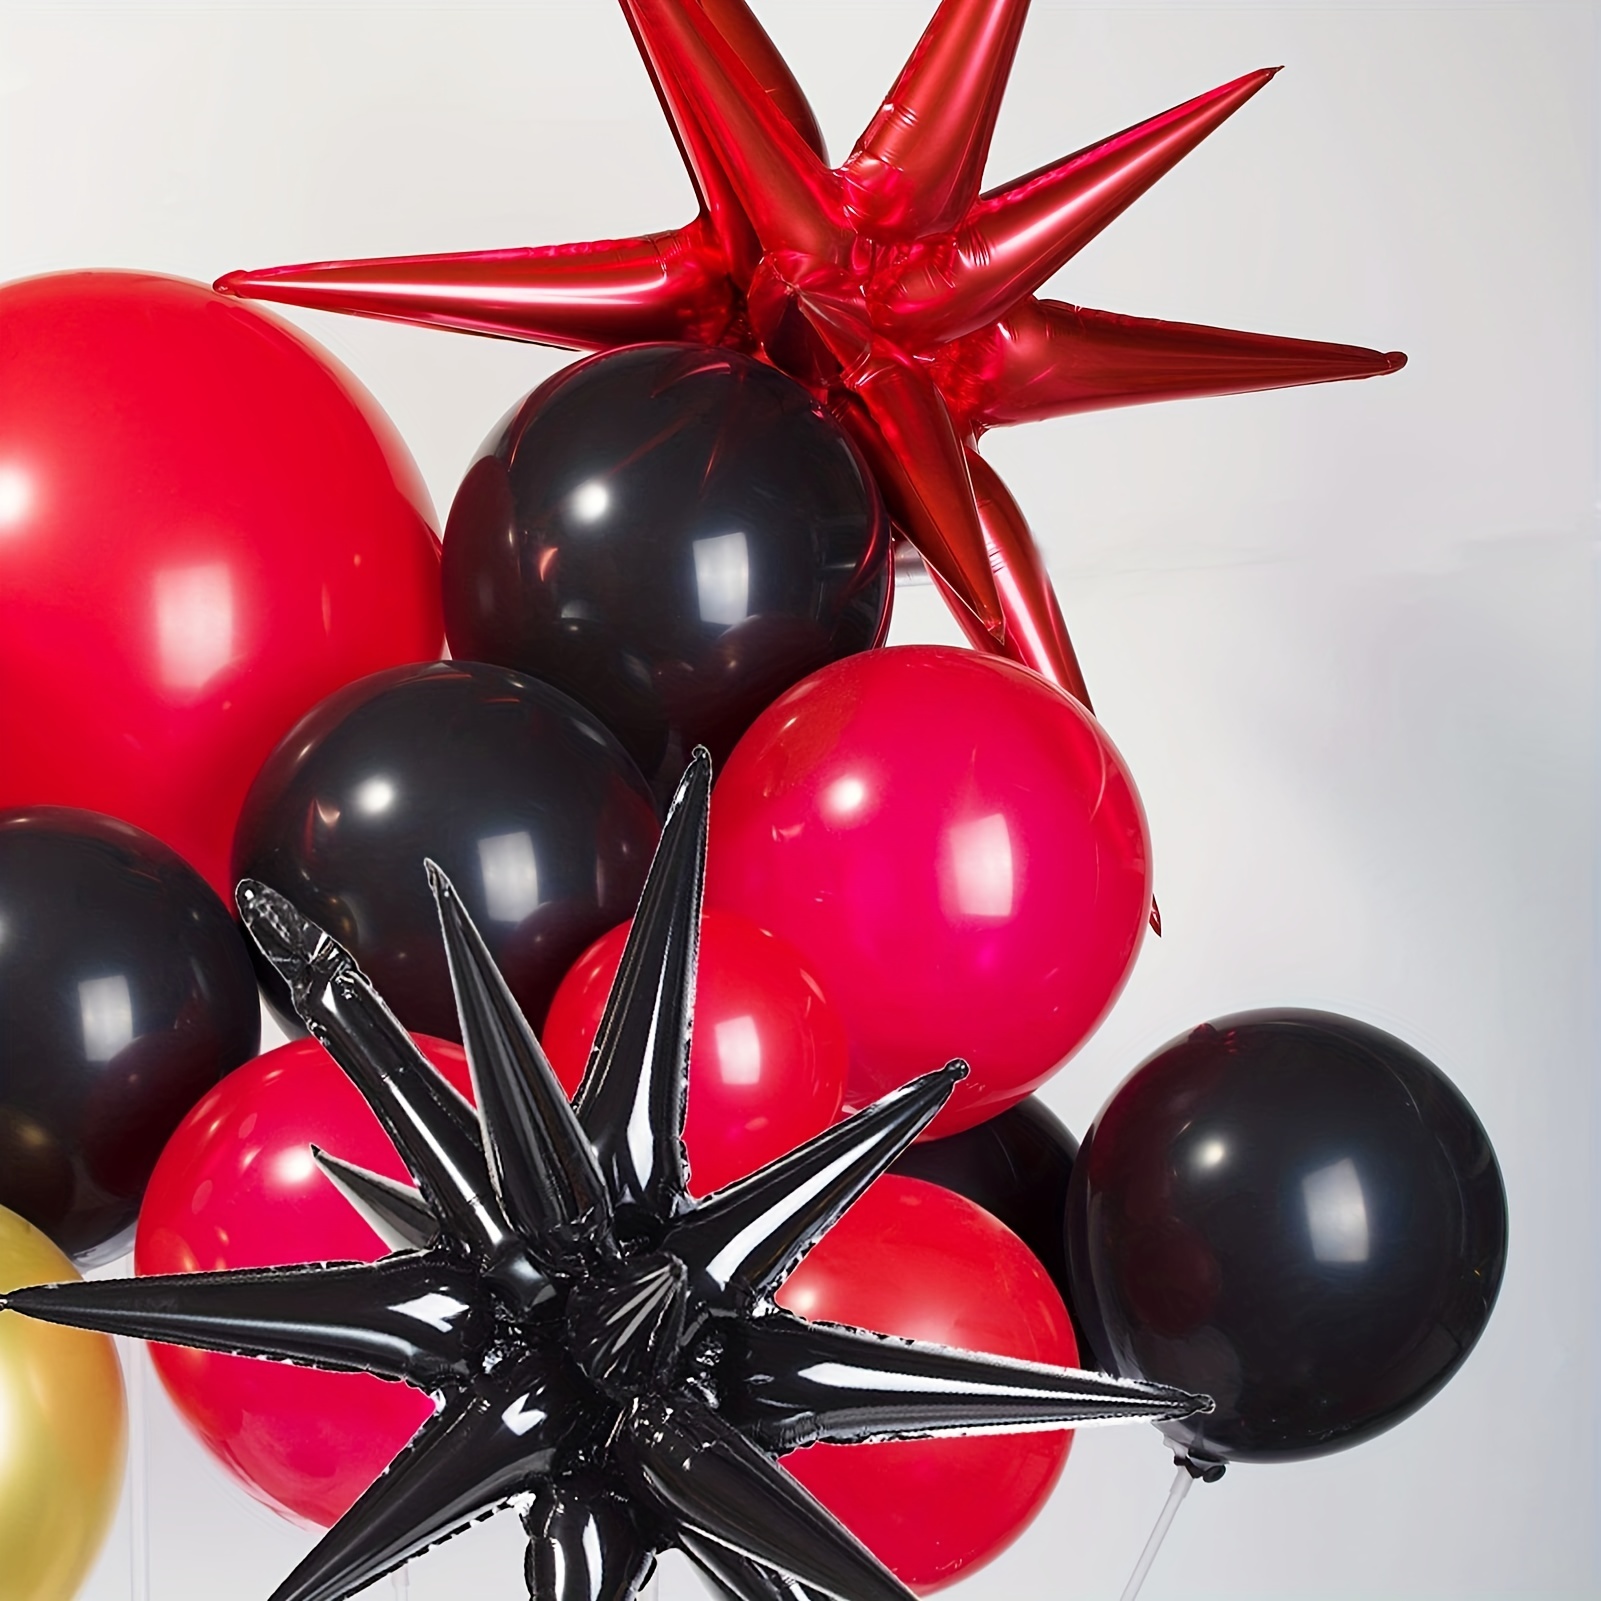 Black, Red And Golden Balloon Decoration Ideas, For Birthday Party Or  Special Occasions